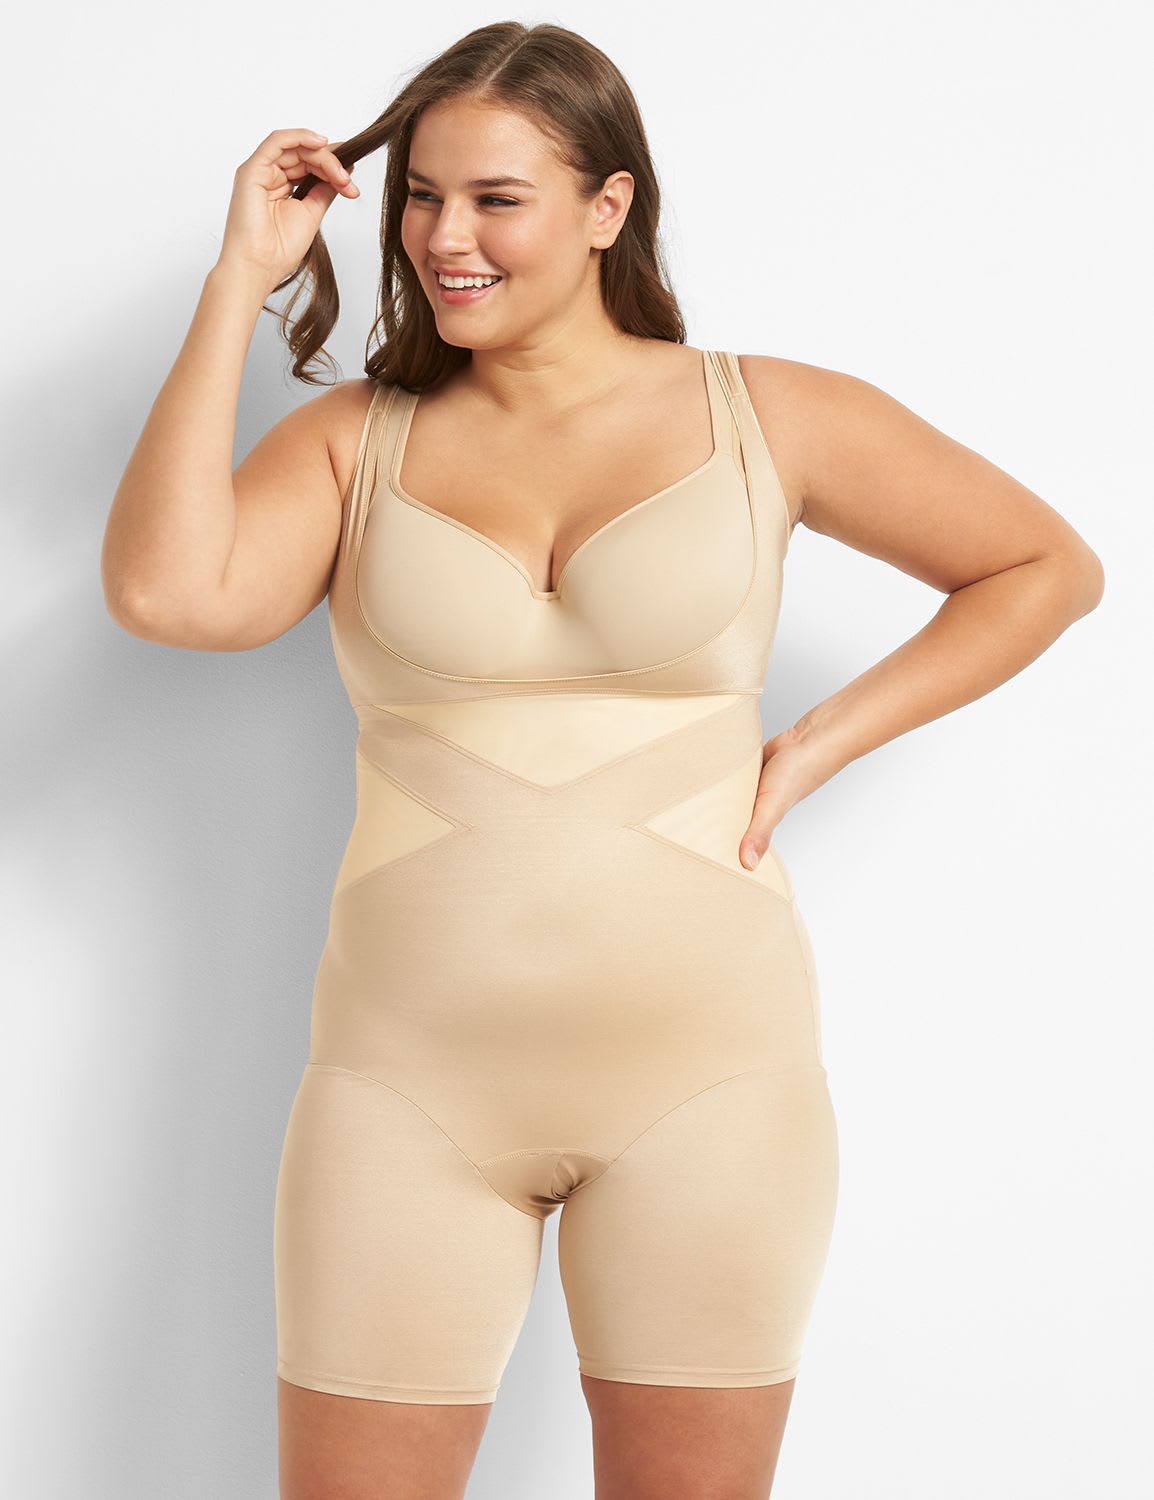 How to Prevent Shapewear Lines – Hourglass Waist